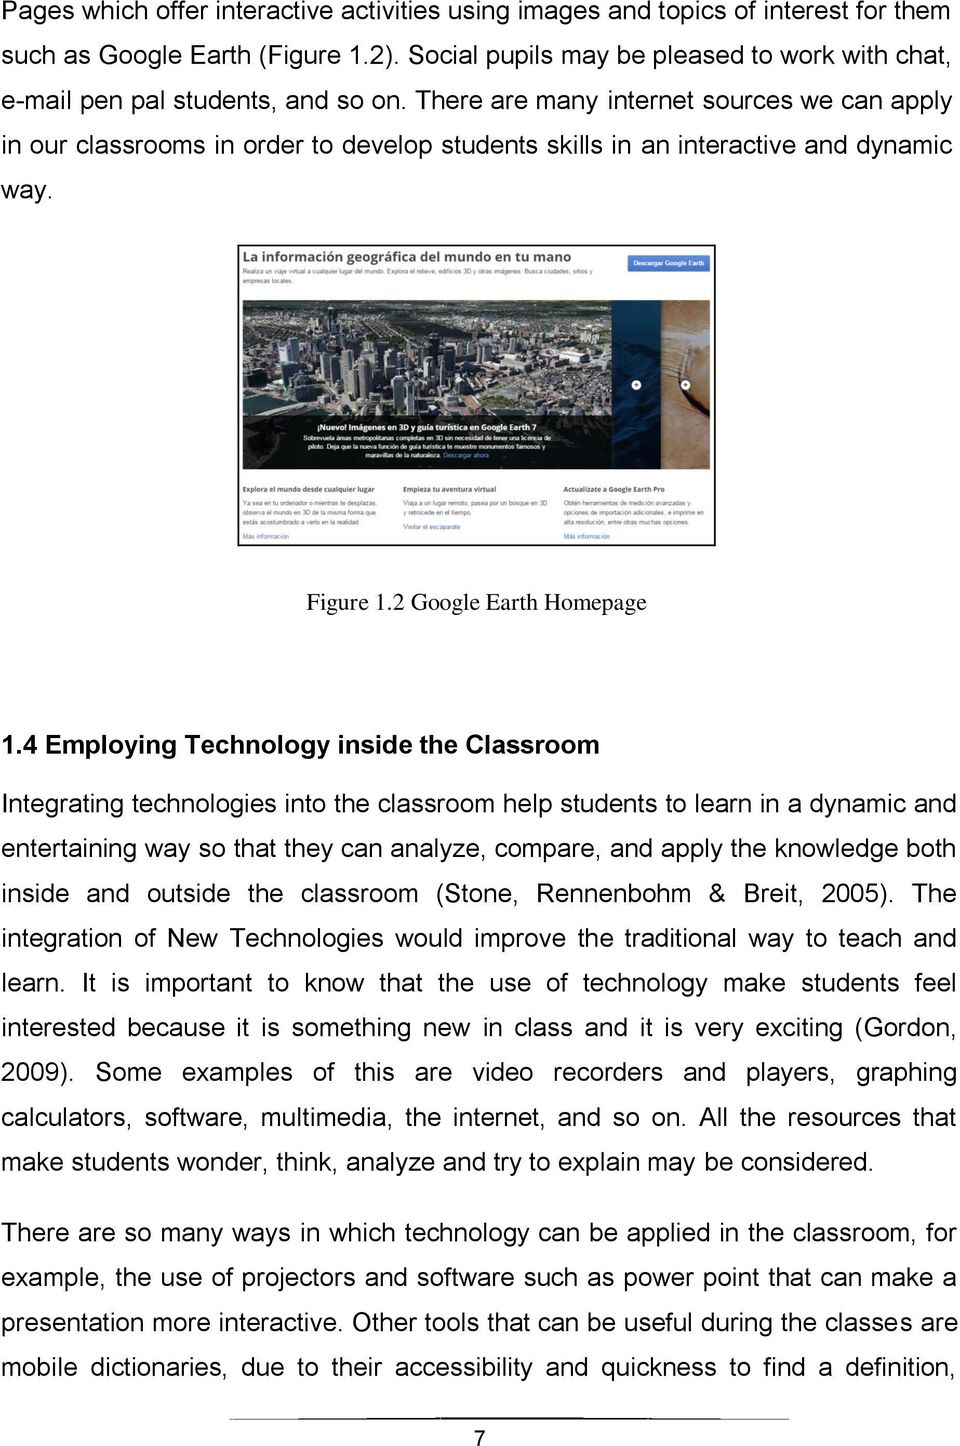 There are many internet sources we can apply in our classrooms in order to develop students skills in an interactive and dynamic way. Figure 1.2 Google Earth Homepage 1.